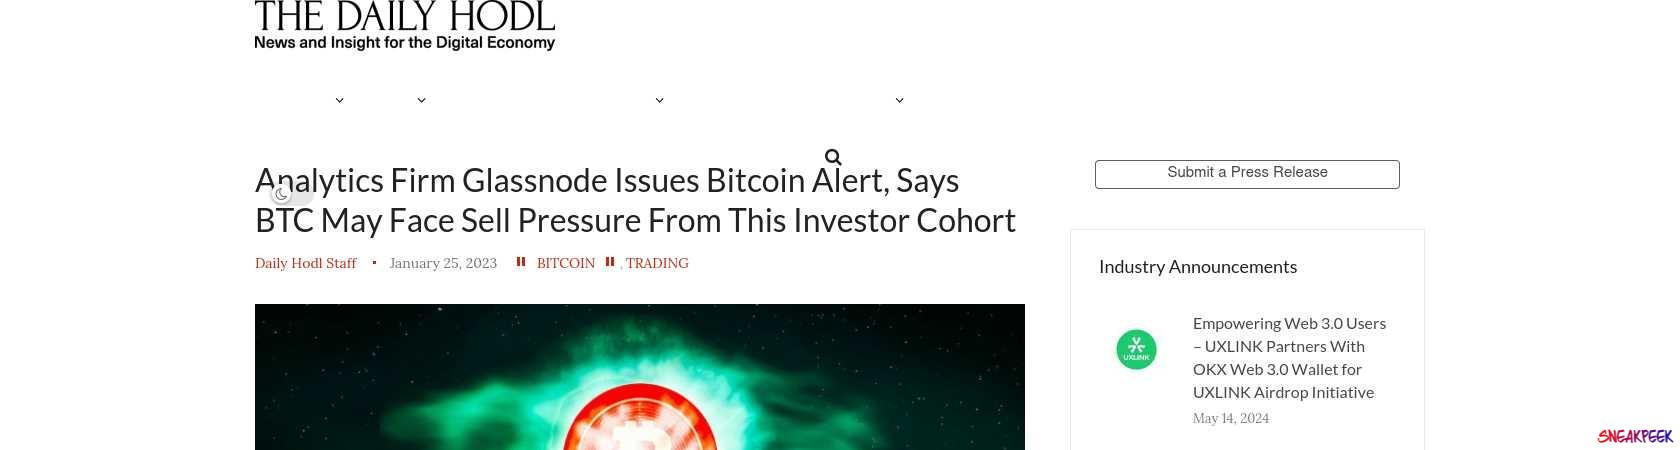 Read the full Article:  ⭲ Analytics Firm Glassnode Issues Bitcoin Alert, Says BTC May Face Sell Pressure From This Investor Cohort